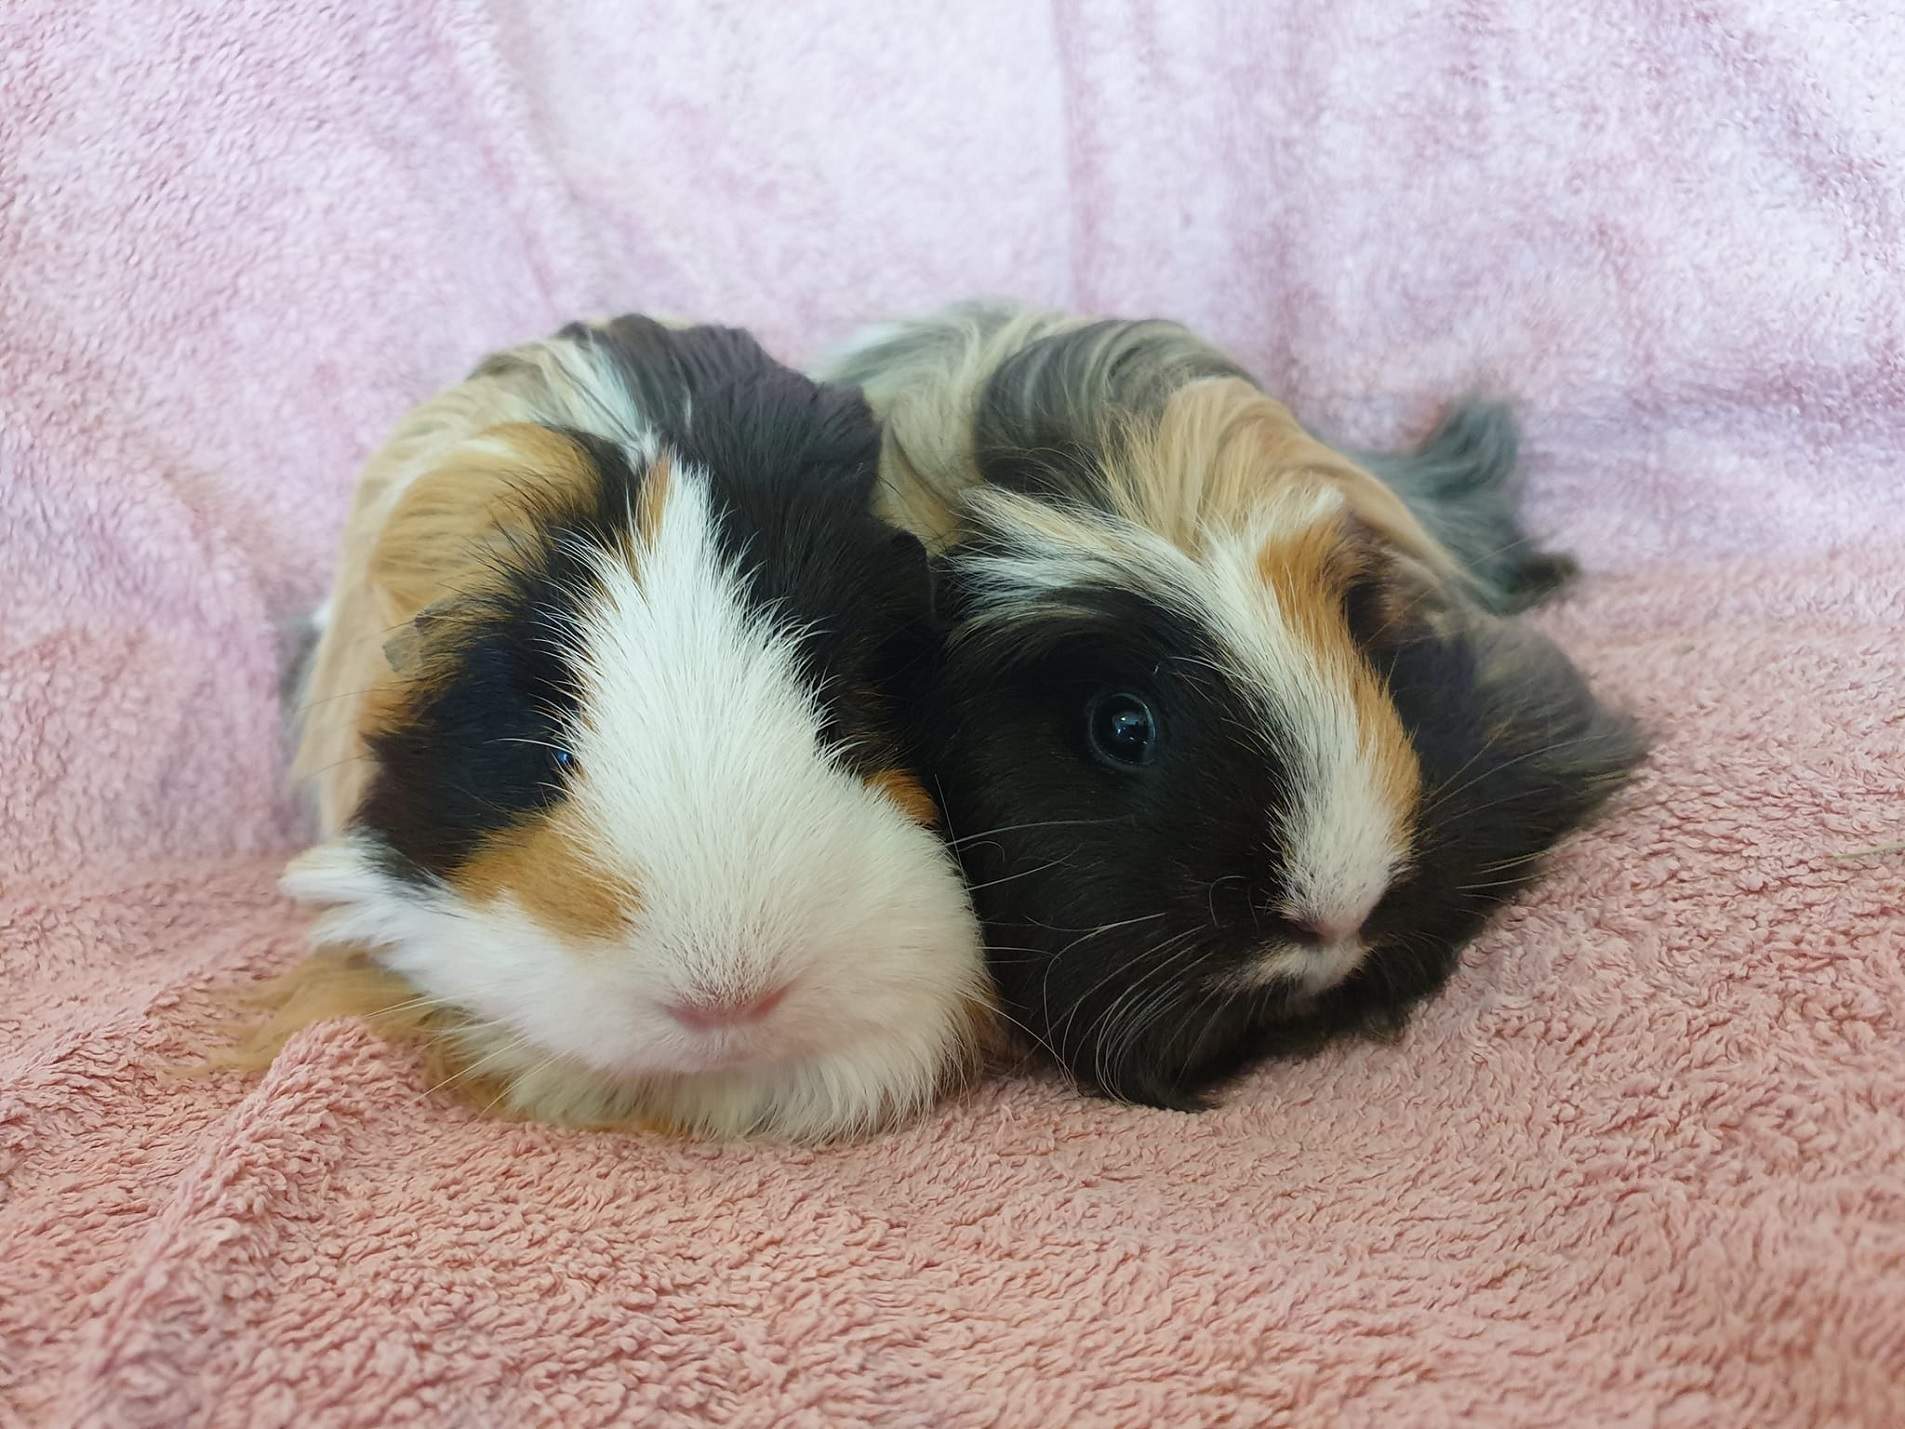 Cinnamon & Spice (being Fostered)